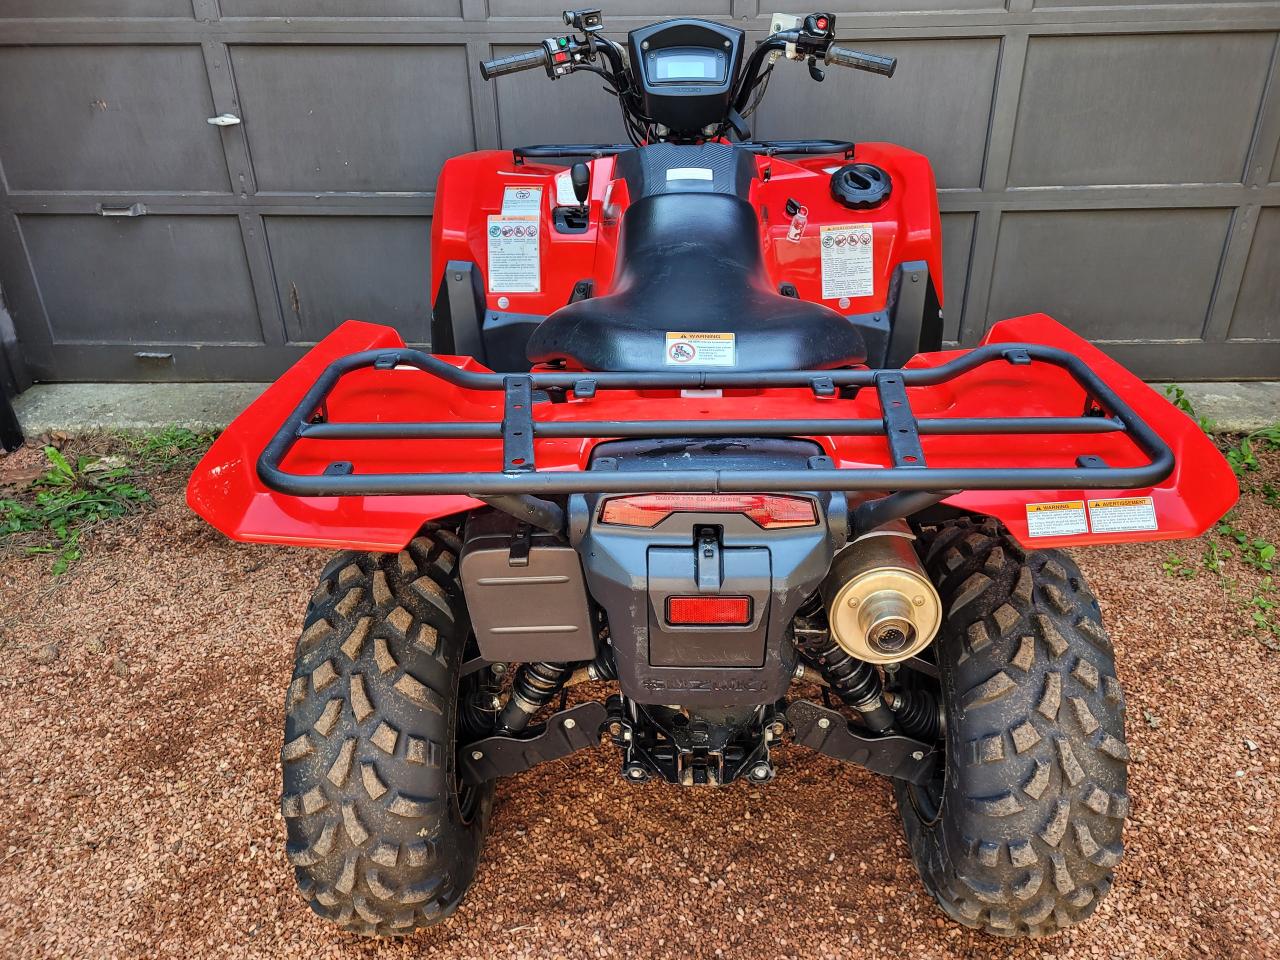 2022 Suzuki KingQuad 750AXi  4x4 1-Owner Financing Available Trade-ins Welcome! - Photo #4